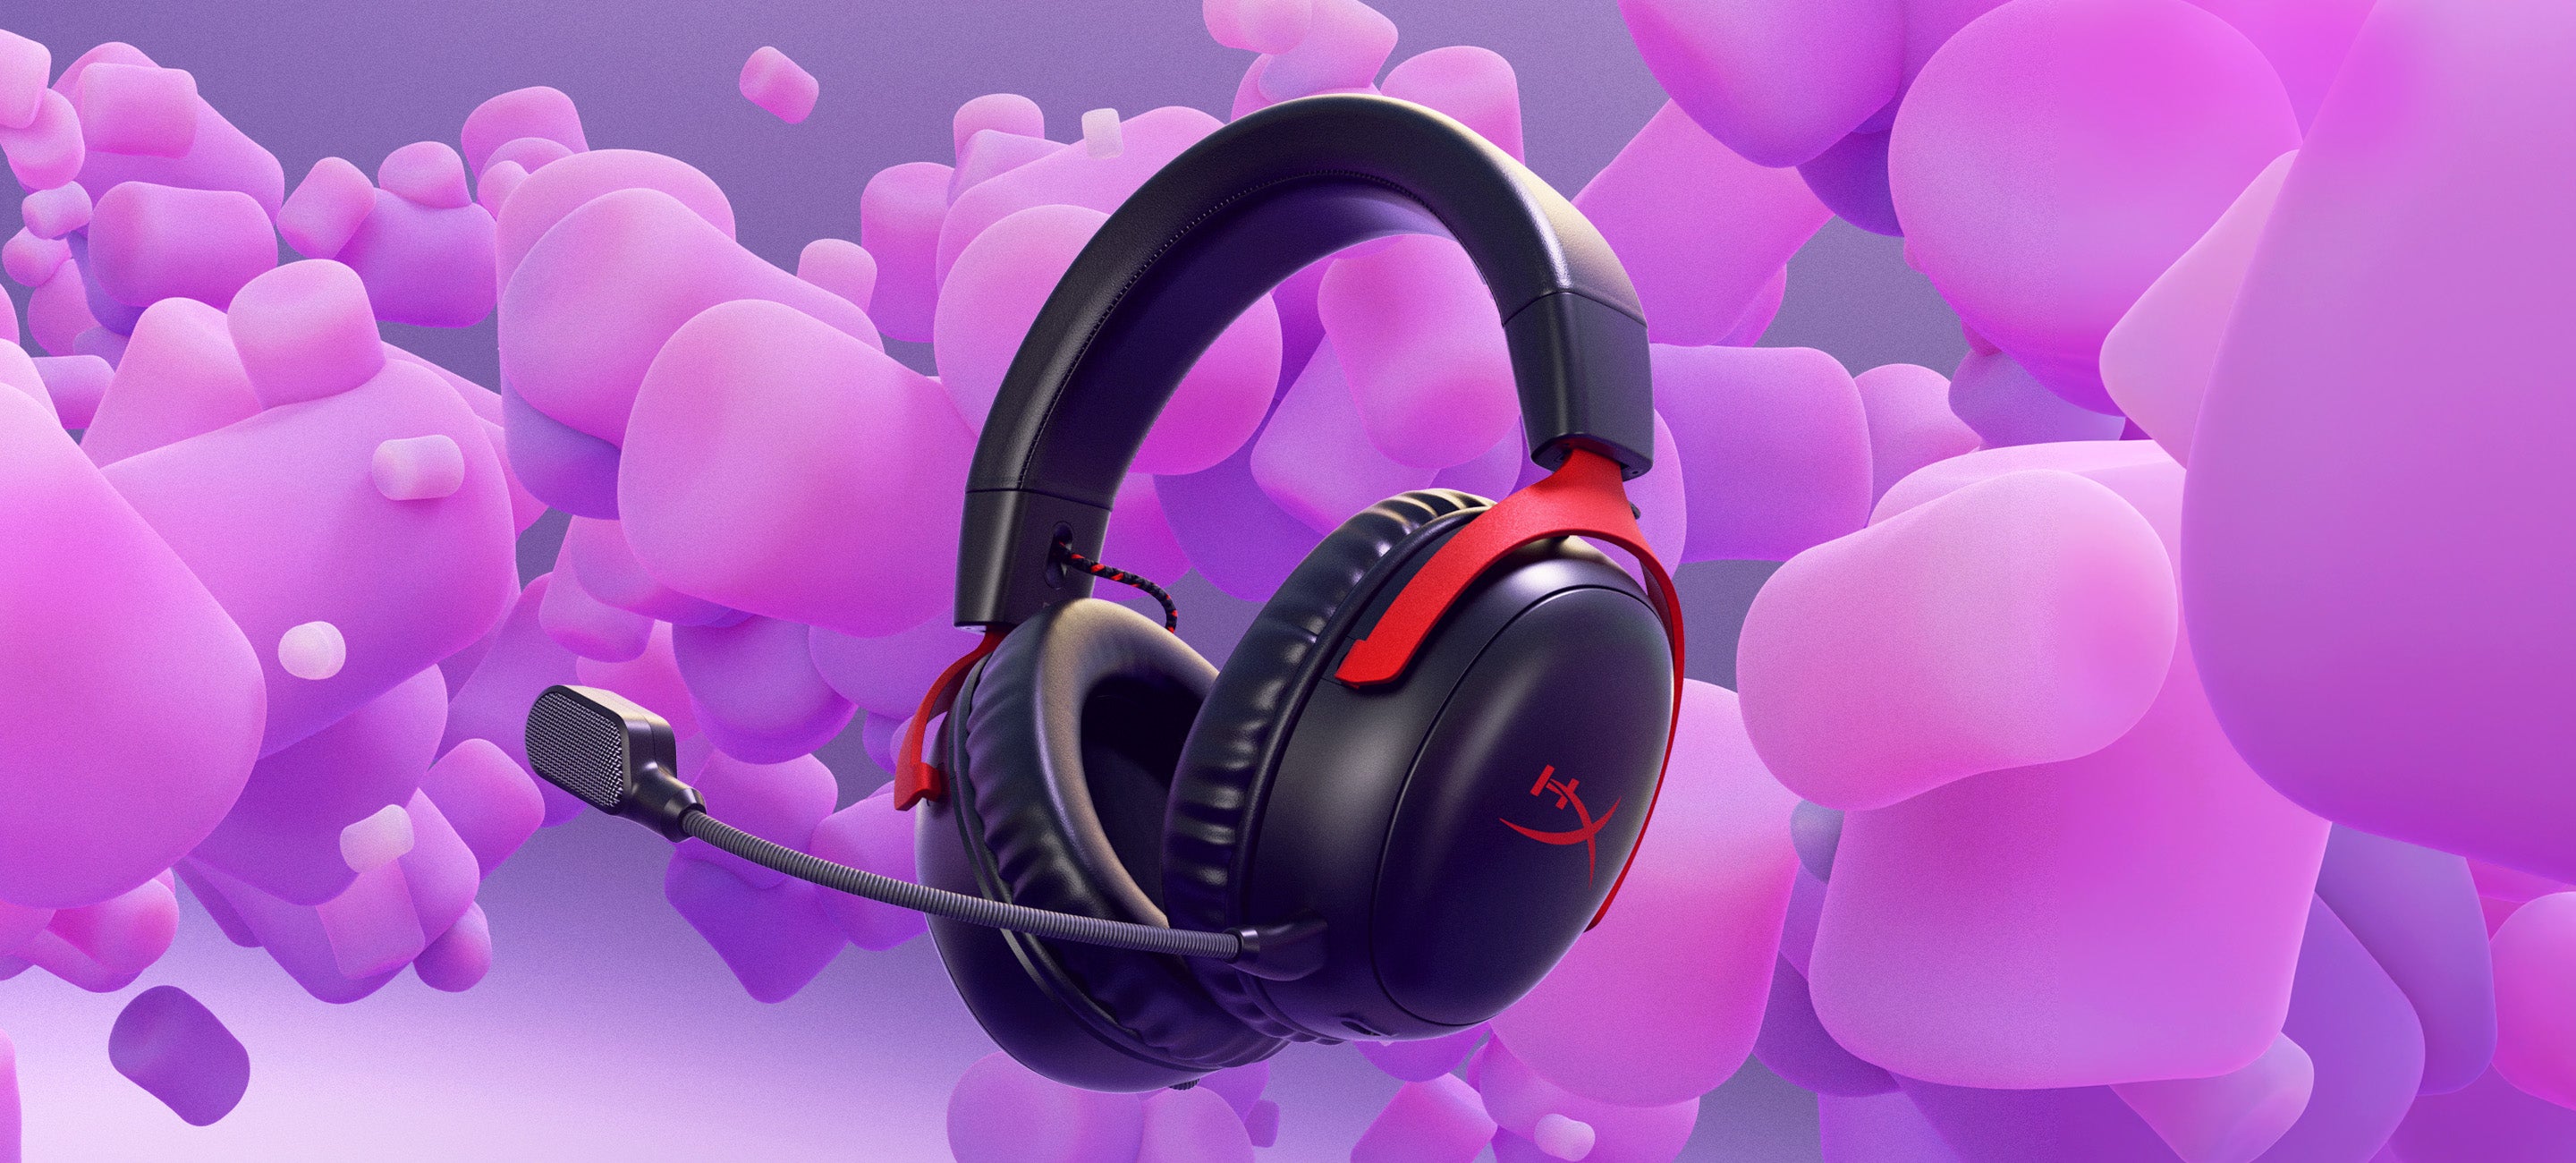 The Difference Between Wired, Wireless, and Bluetooth Headsets – HyperX